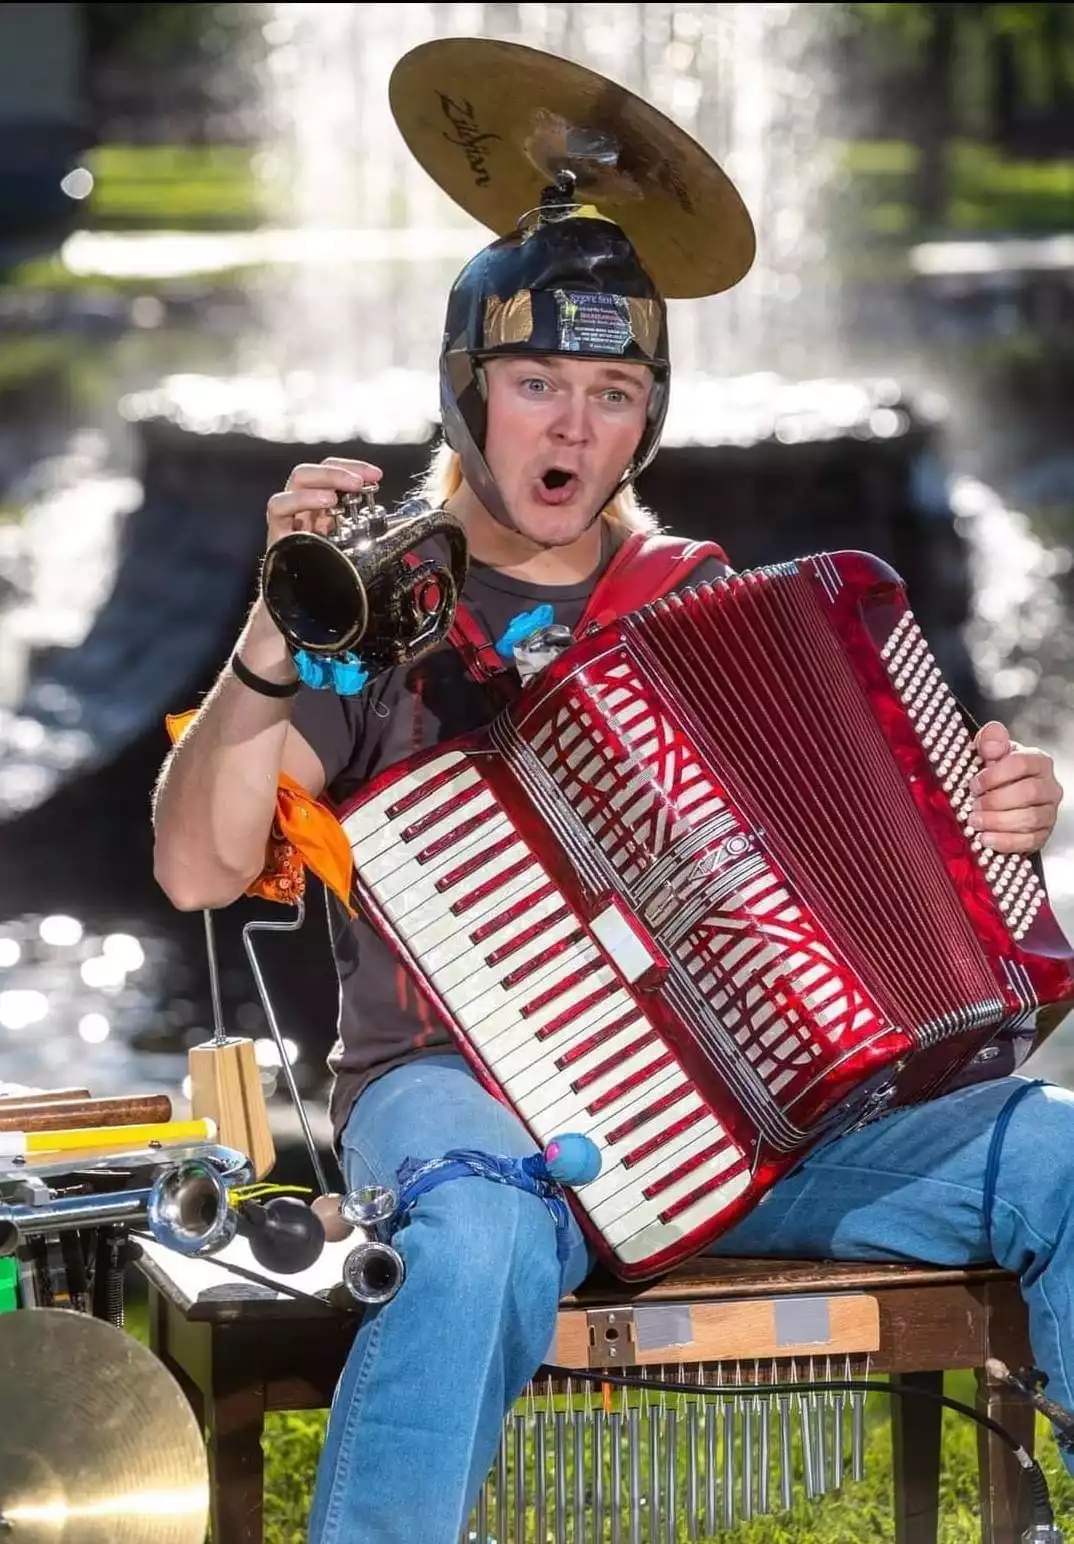 Steve Solkela of the Overpopulated One-Man Band is a performer at FinnFest